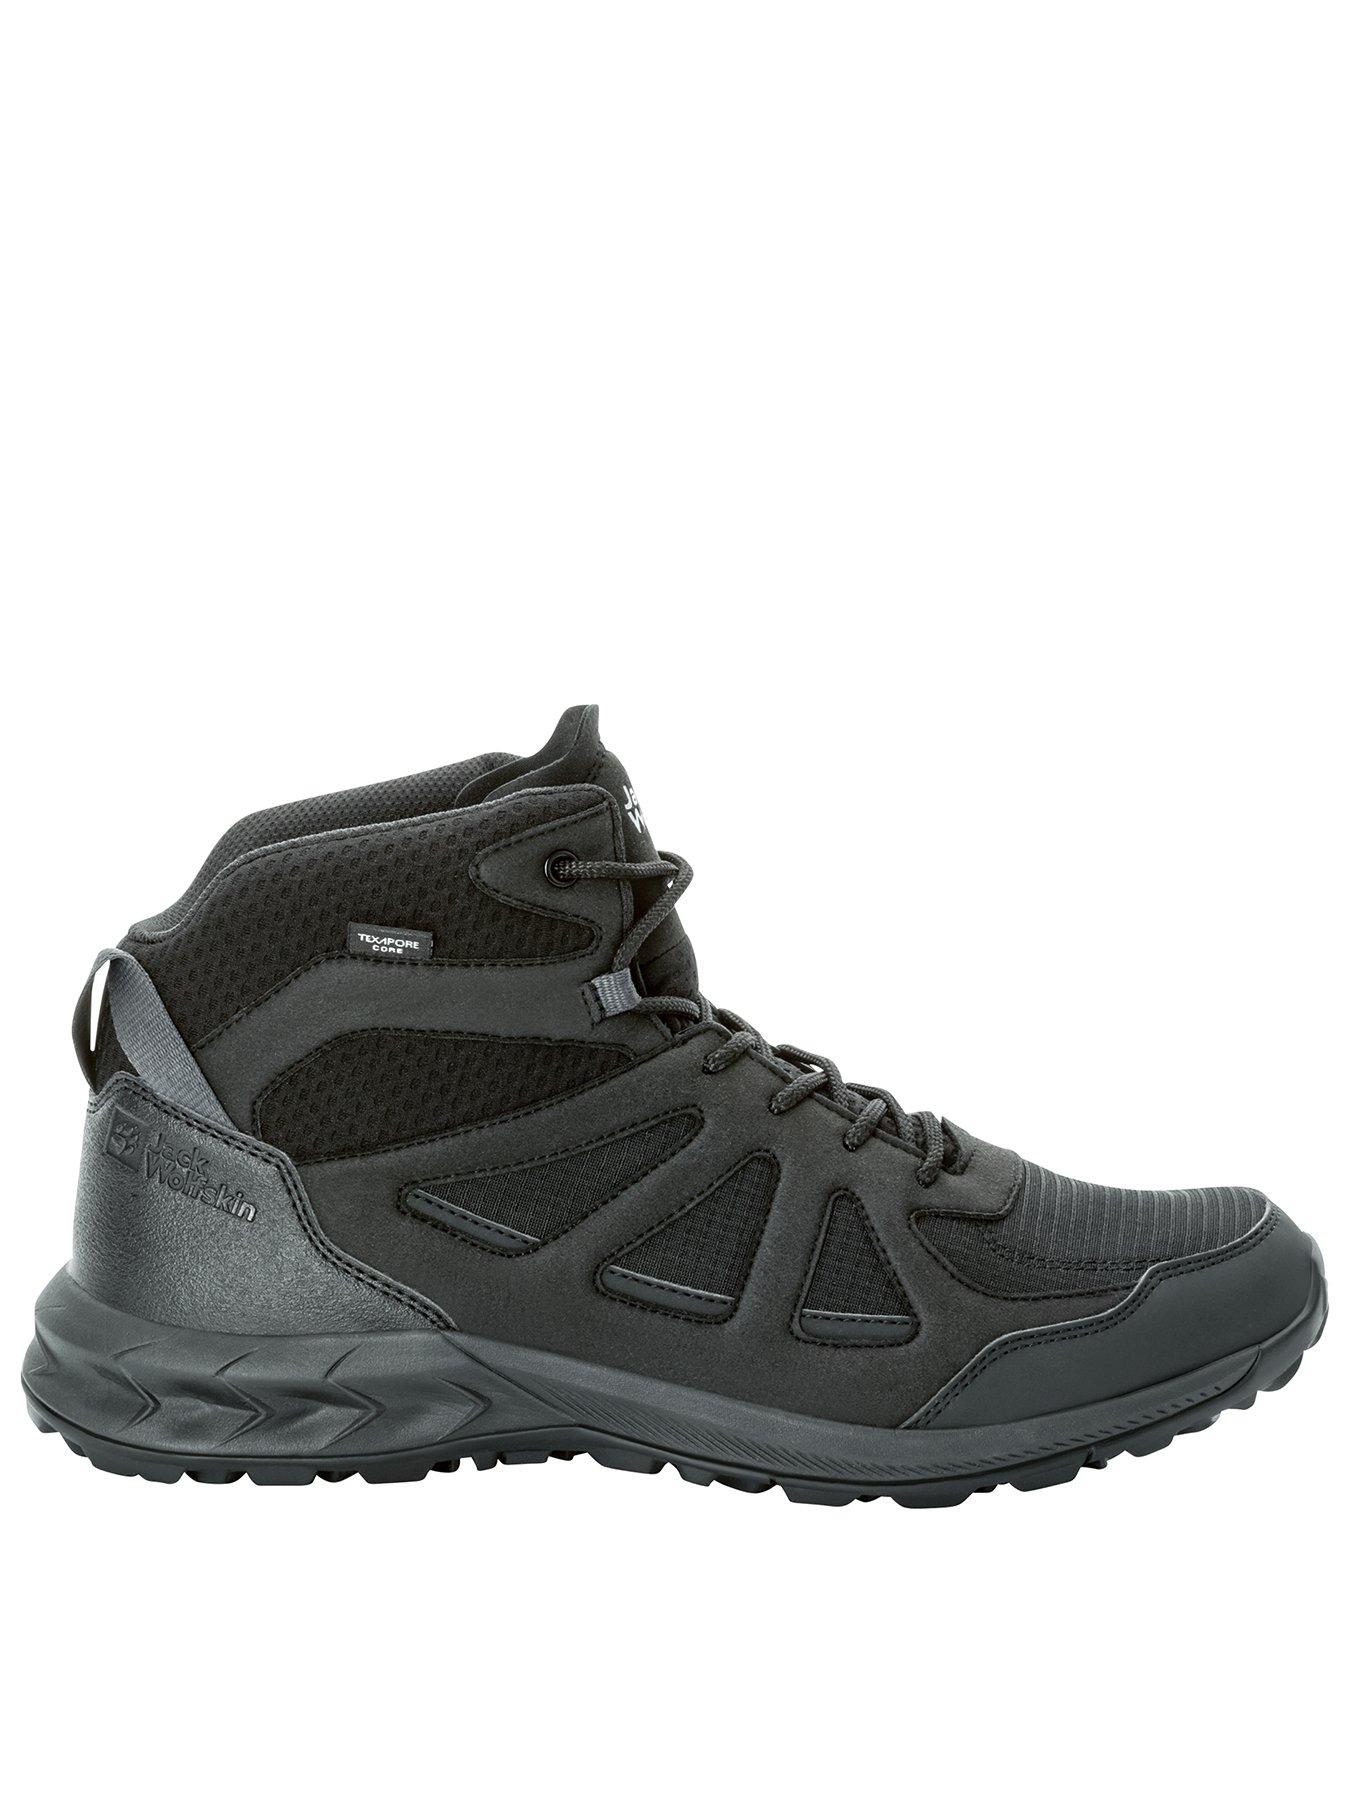 Jack Wolfskin's Terraventure Texapore Hiking Boots: Small Footprint, Big  Strides in Footwear Performance